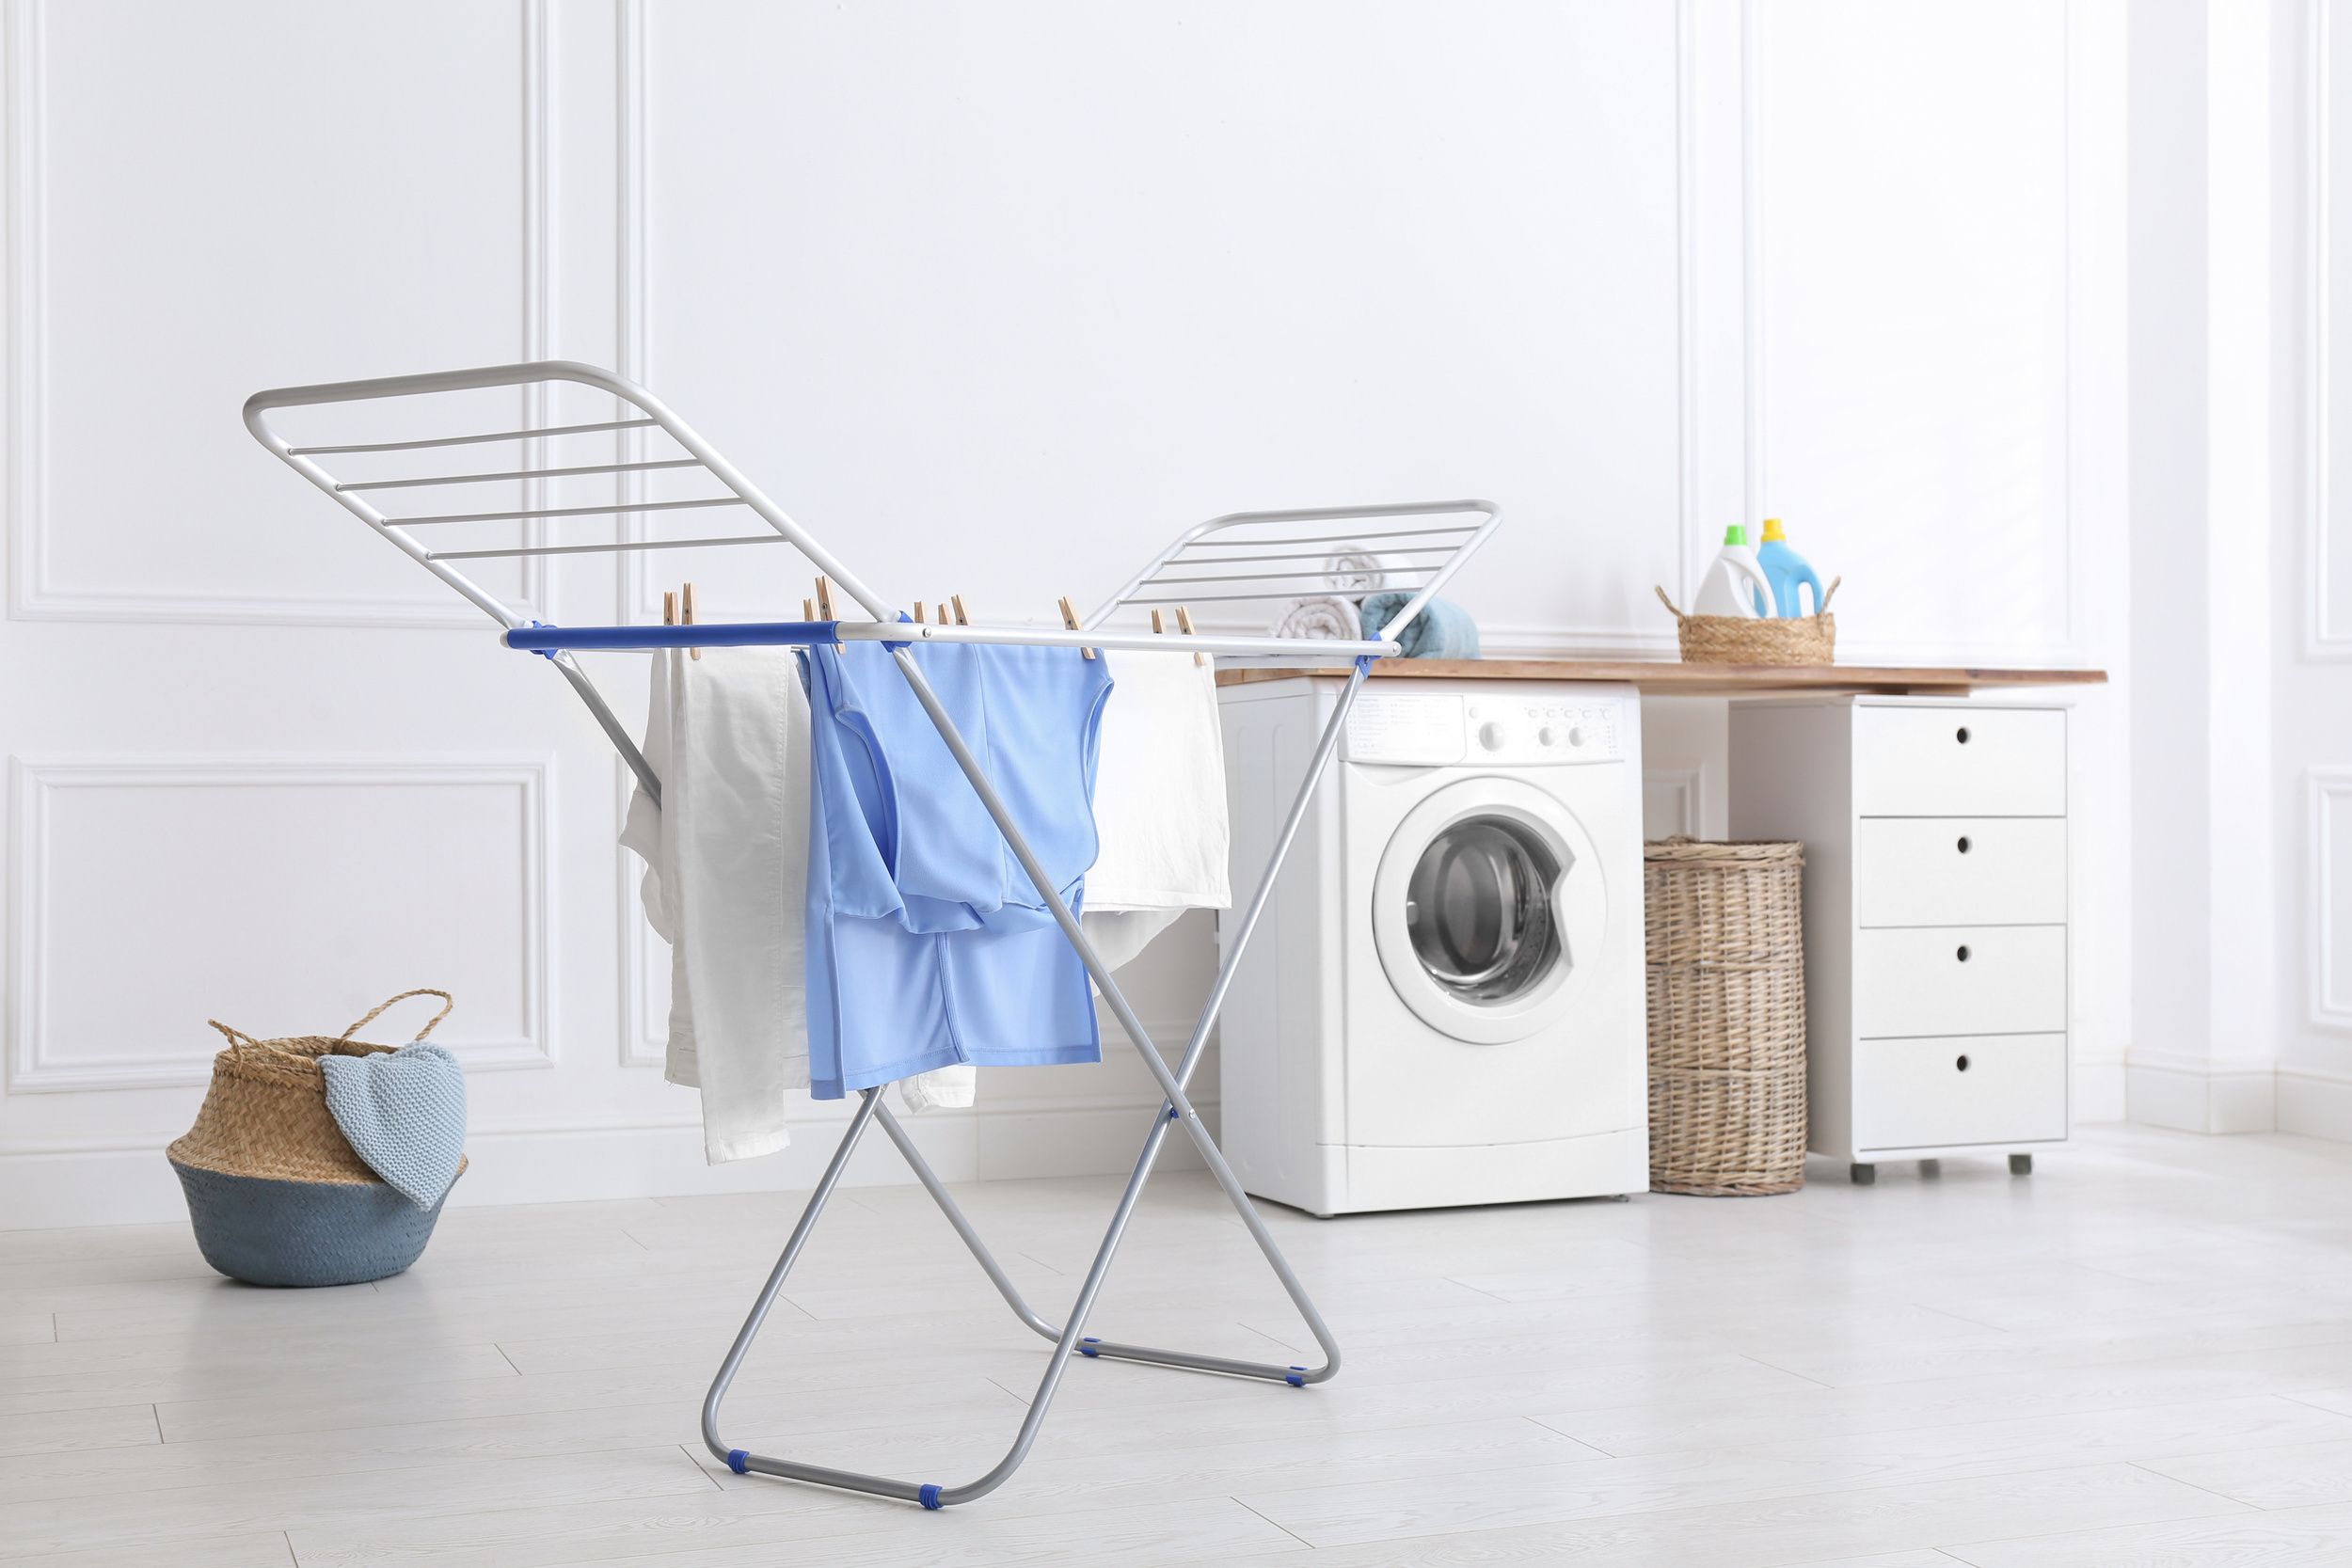 <p>I’m not sure the reasoning for this, but it is significantly less common to have a dryer in Europe. If you do have one, it’s a part of your washer. In my experience, that is less effective and wrinkles clothes much more easily. Hang dry is the norm here.</p><p>You may also like: <a href='https://www.yardbarker.com/lifestyle/articles/25_classic_ice_cream_truck_treats_you_probably_forgot_about_031924/s1__23965132'>25 classic ice cream truck treats you probably forgot about</a></p>